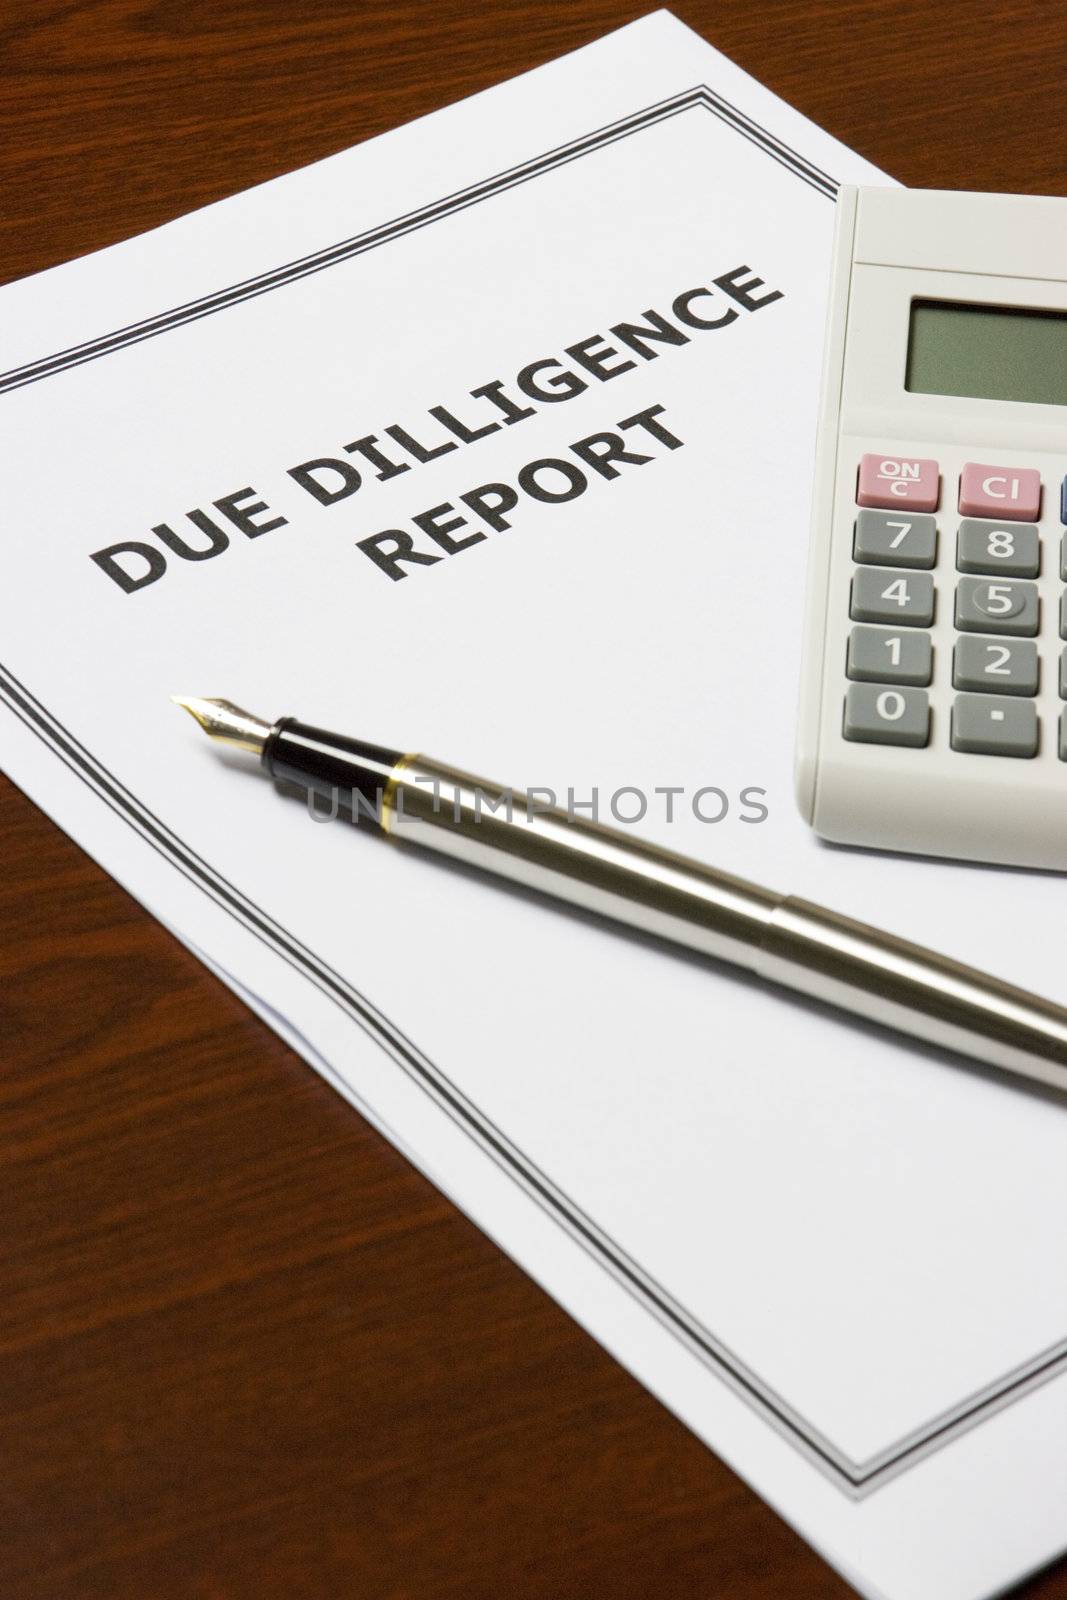 Image of a due dilligence report on an office table.